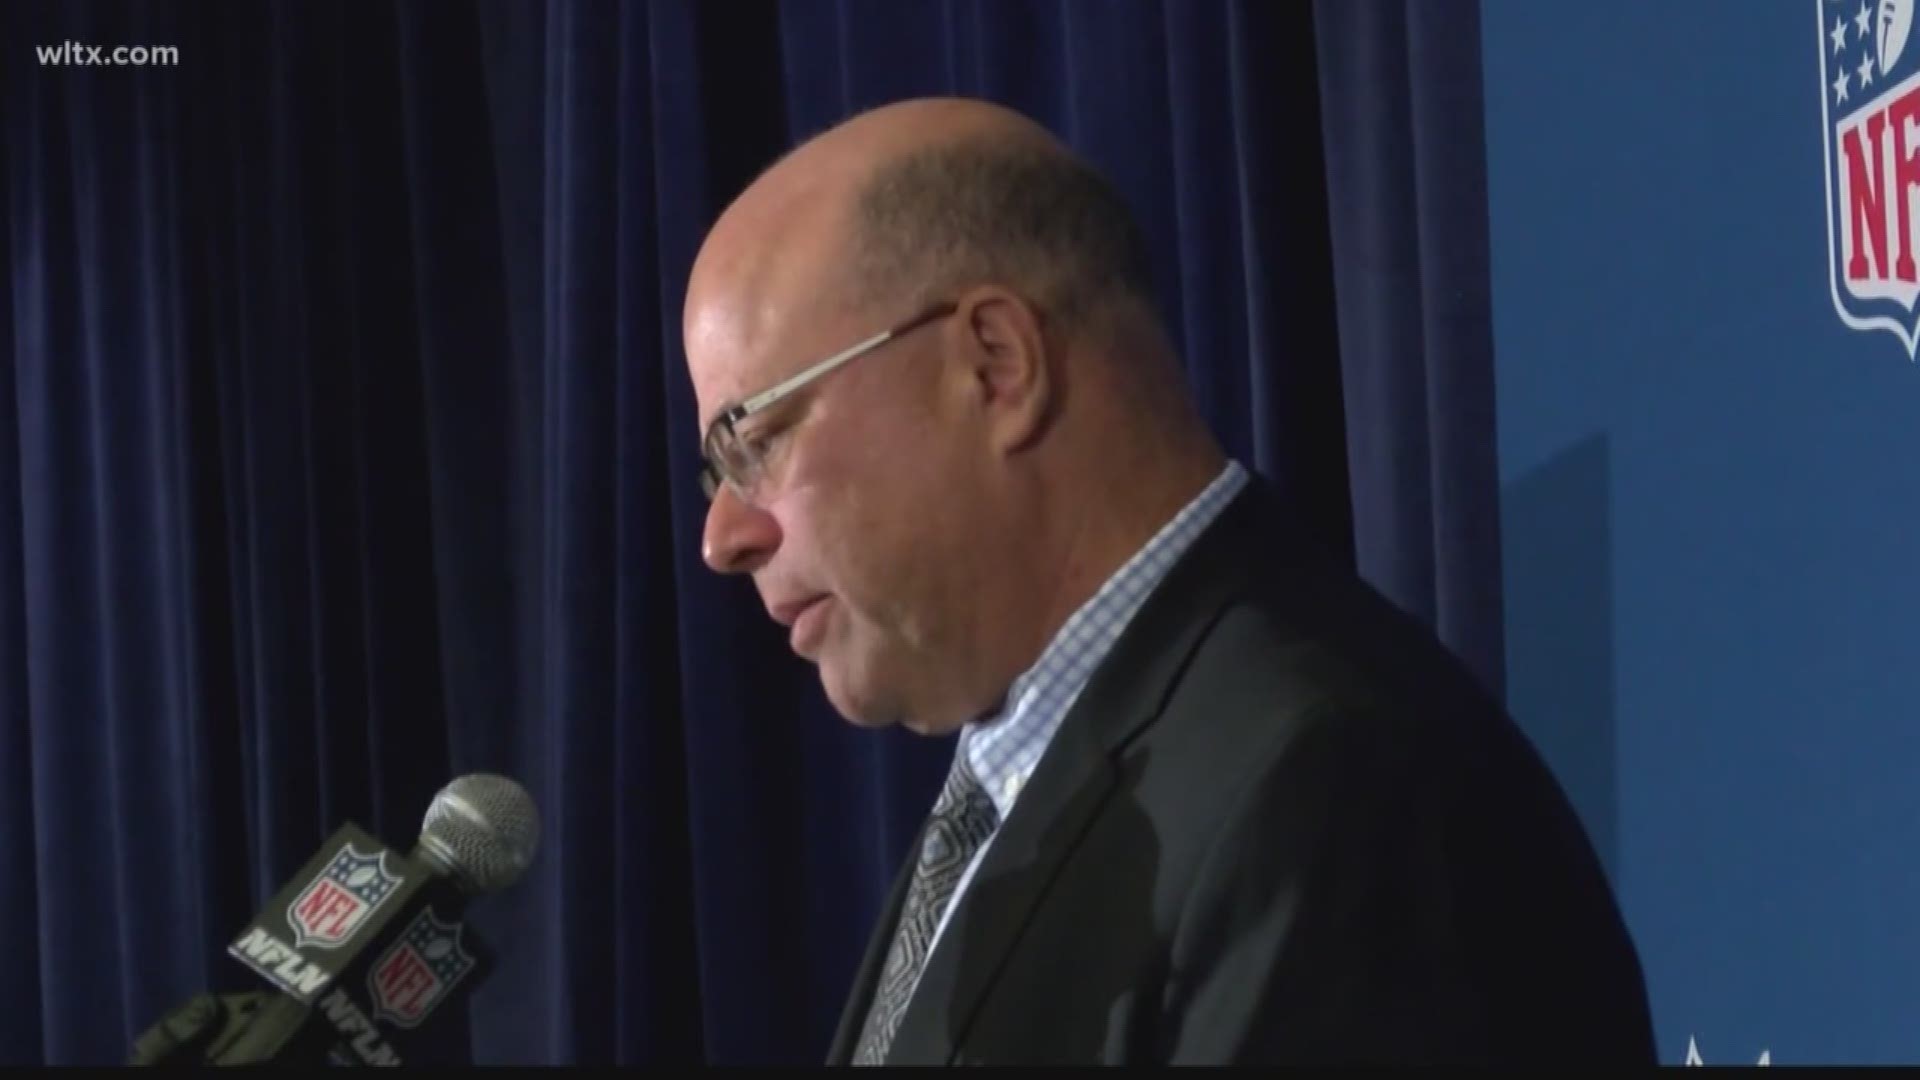 After he was overwhelmingly approved as the new owner of the Carolina Panthers, David Tepper answered questions concerning the team's status in the Queen City.